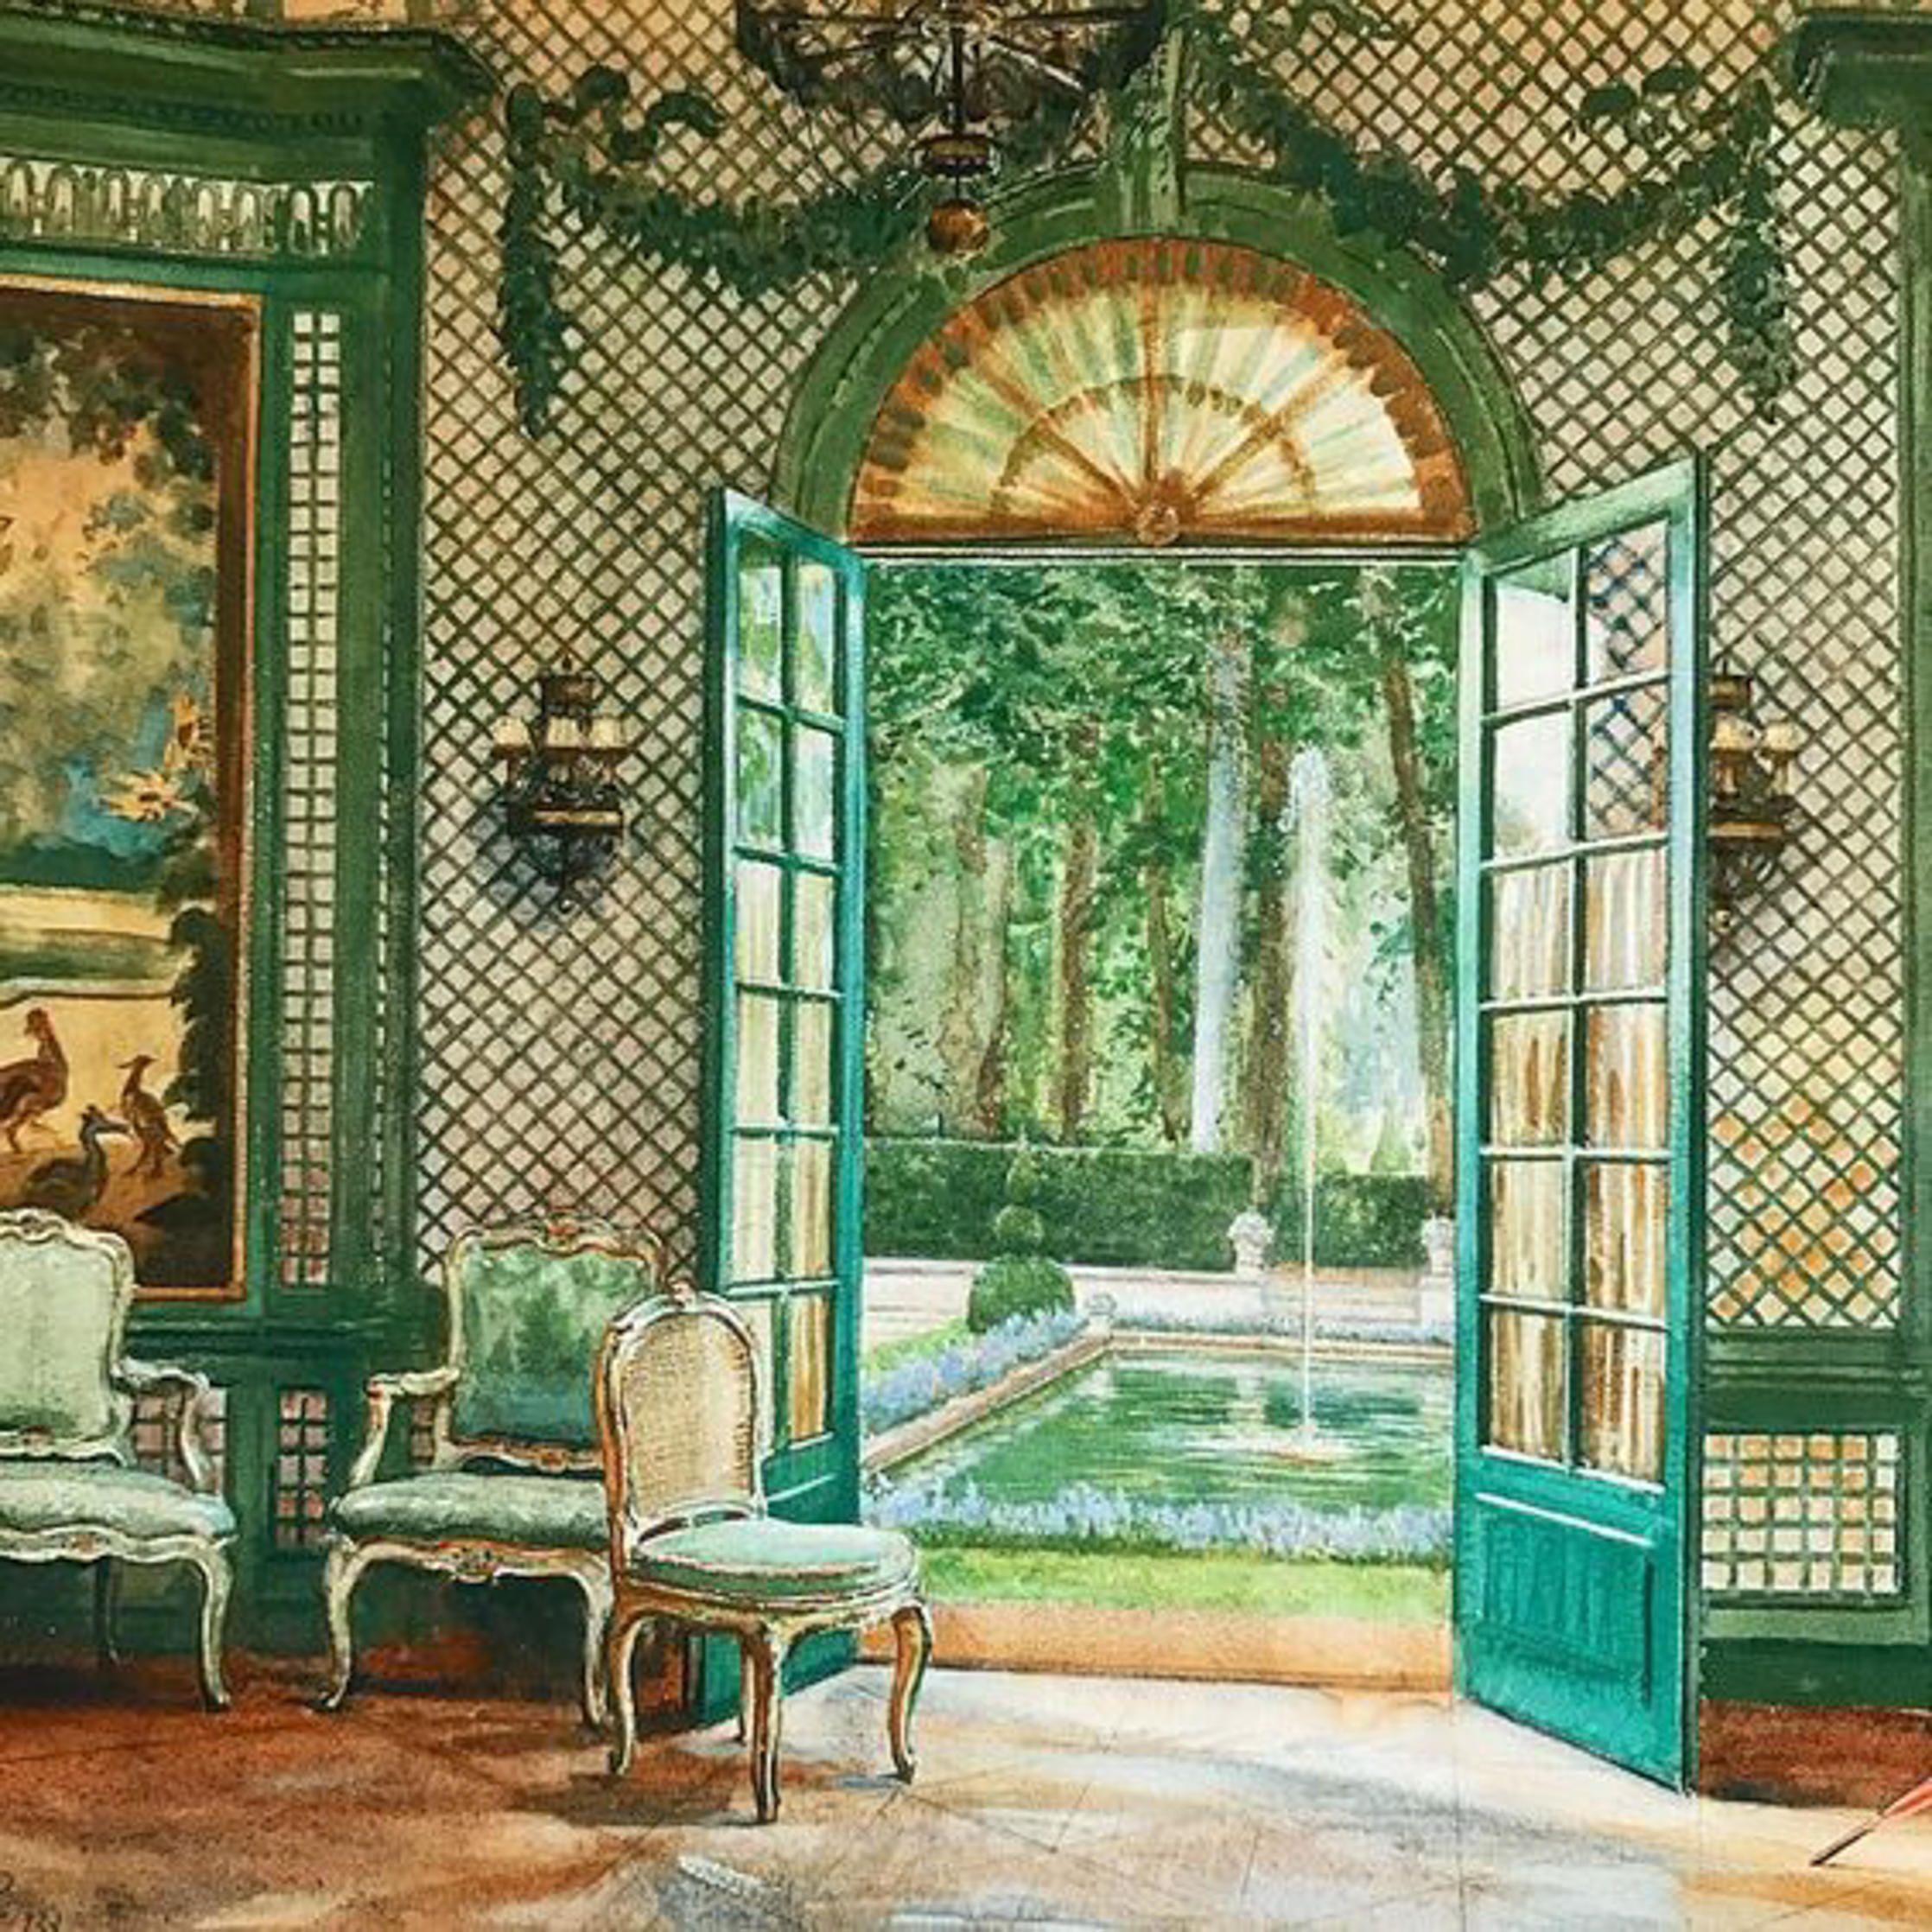 Interior of Elsie De Wolfe's music pavilion looking out on to the pool, The Villa Trianon